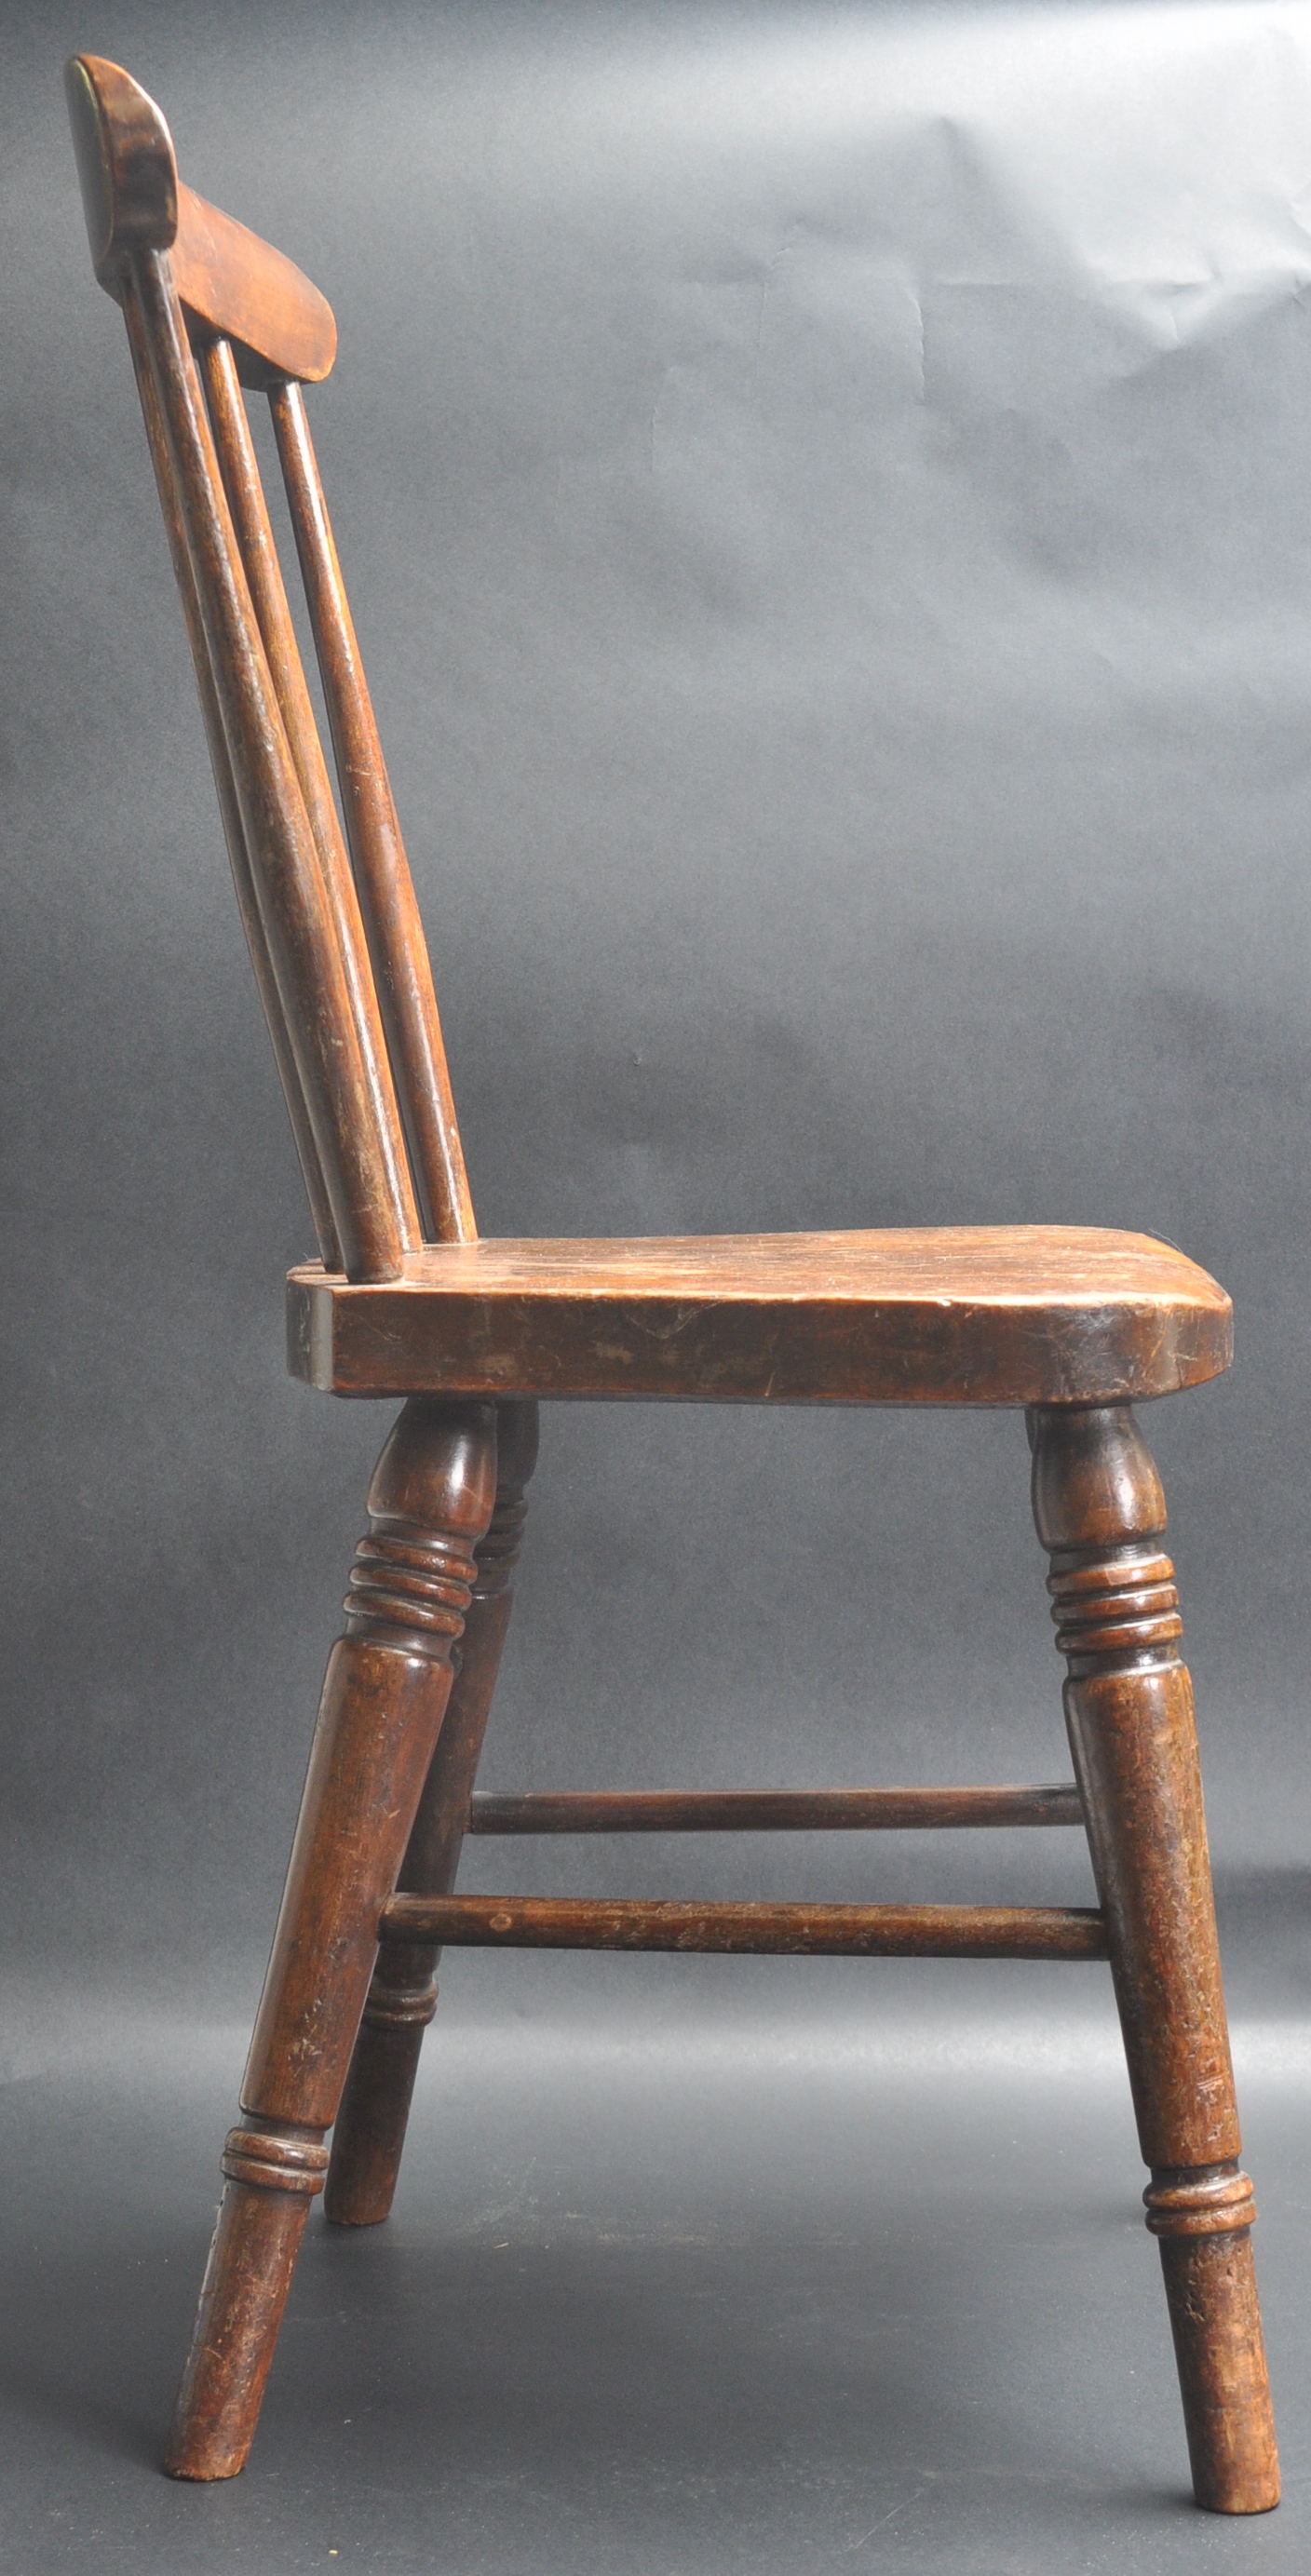 EARLY 20TH CENTURY BEECH AND ELM WINDSOR CHAIR - Image 4 of 4